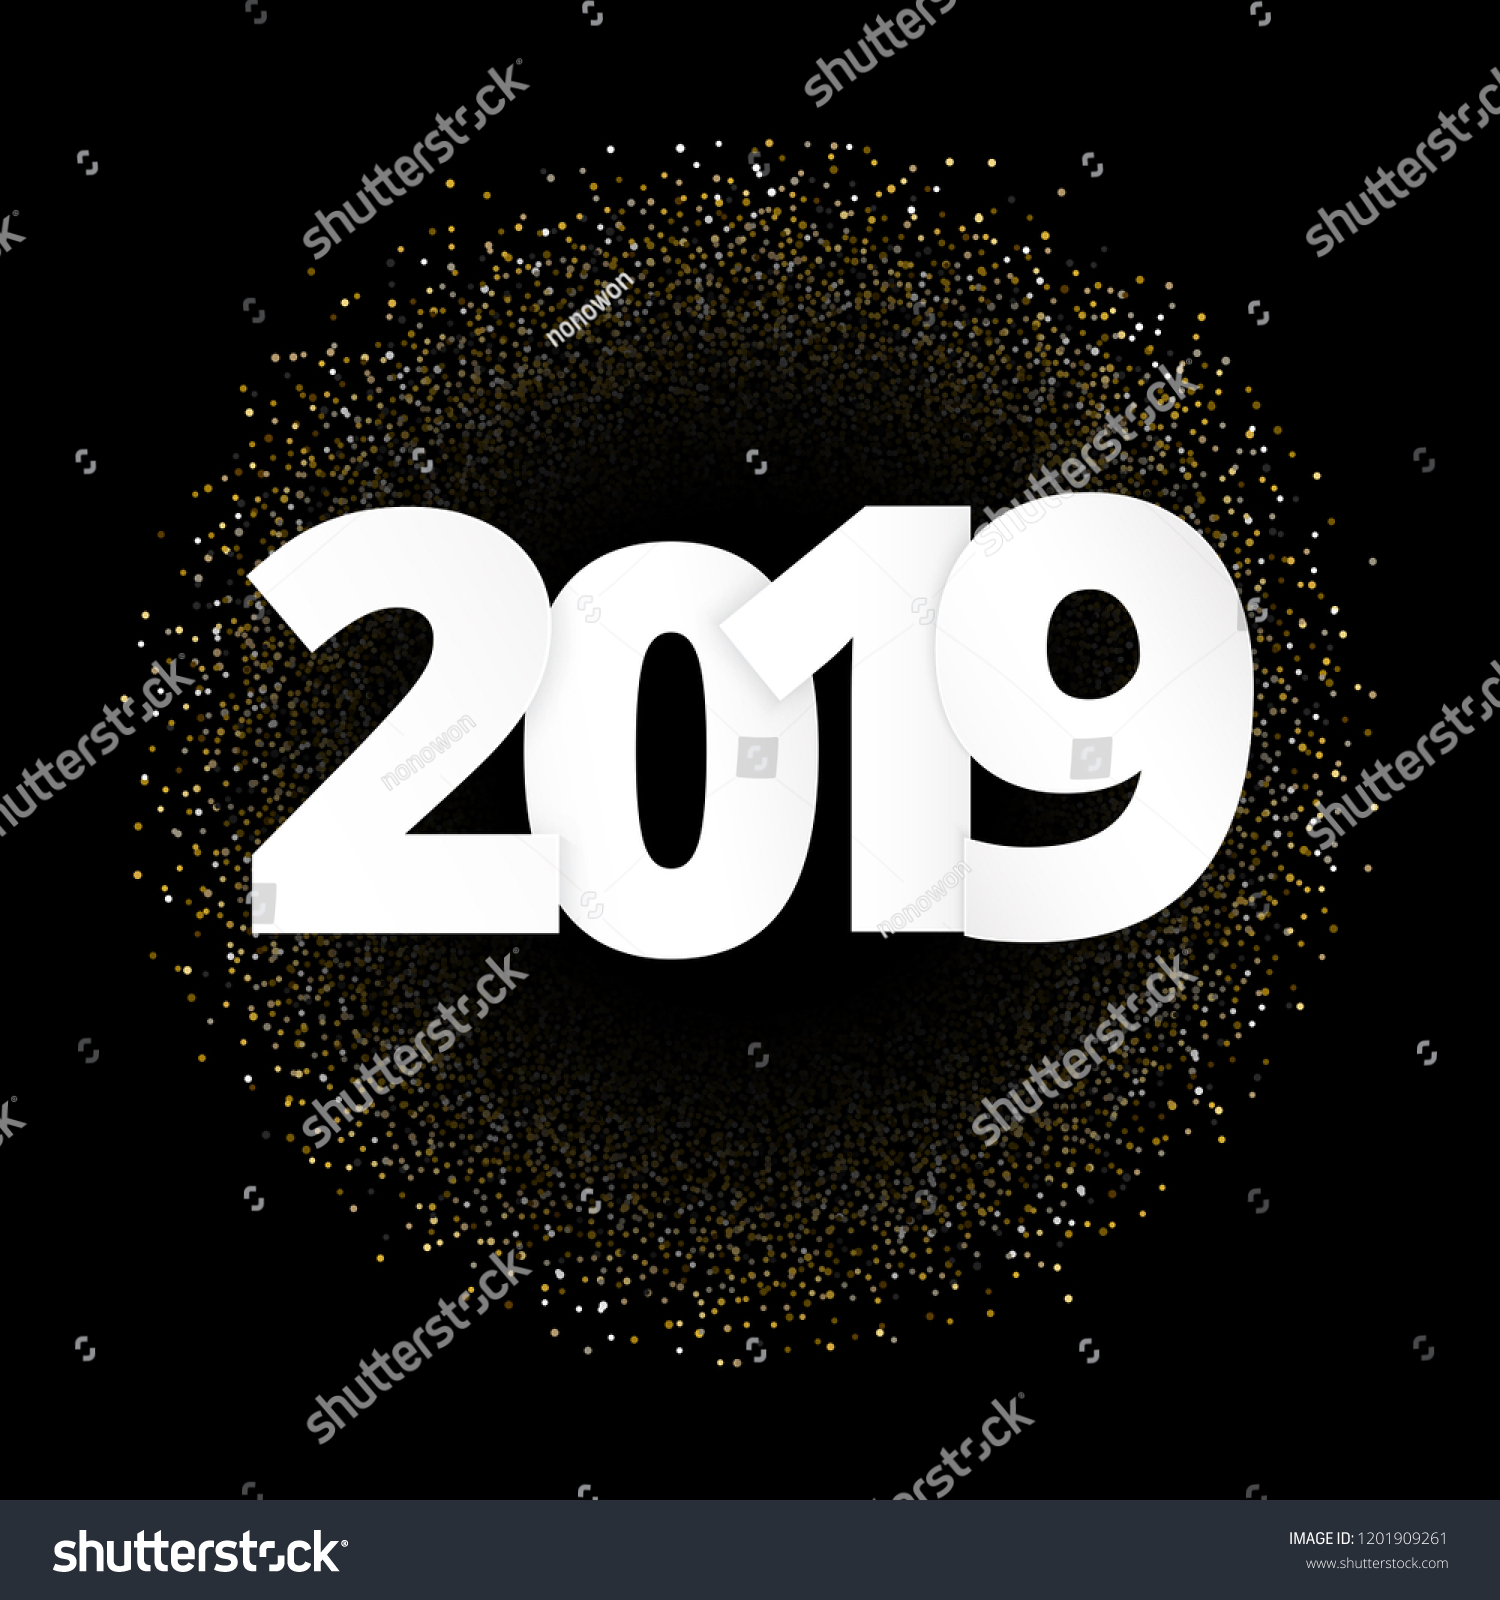 2019 A Happy New Year xmas greetings. Dark background, classic isolated gold colored numbers. Seasonal luxurious glittering ad,illustration EPS10. #1201909261